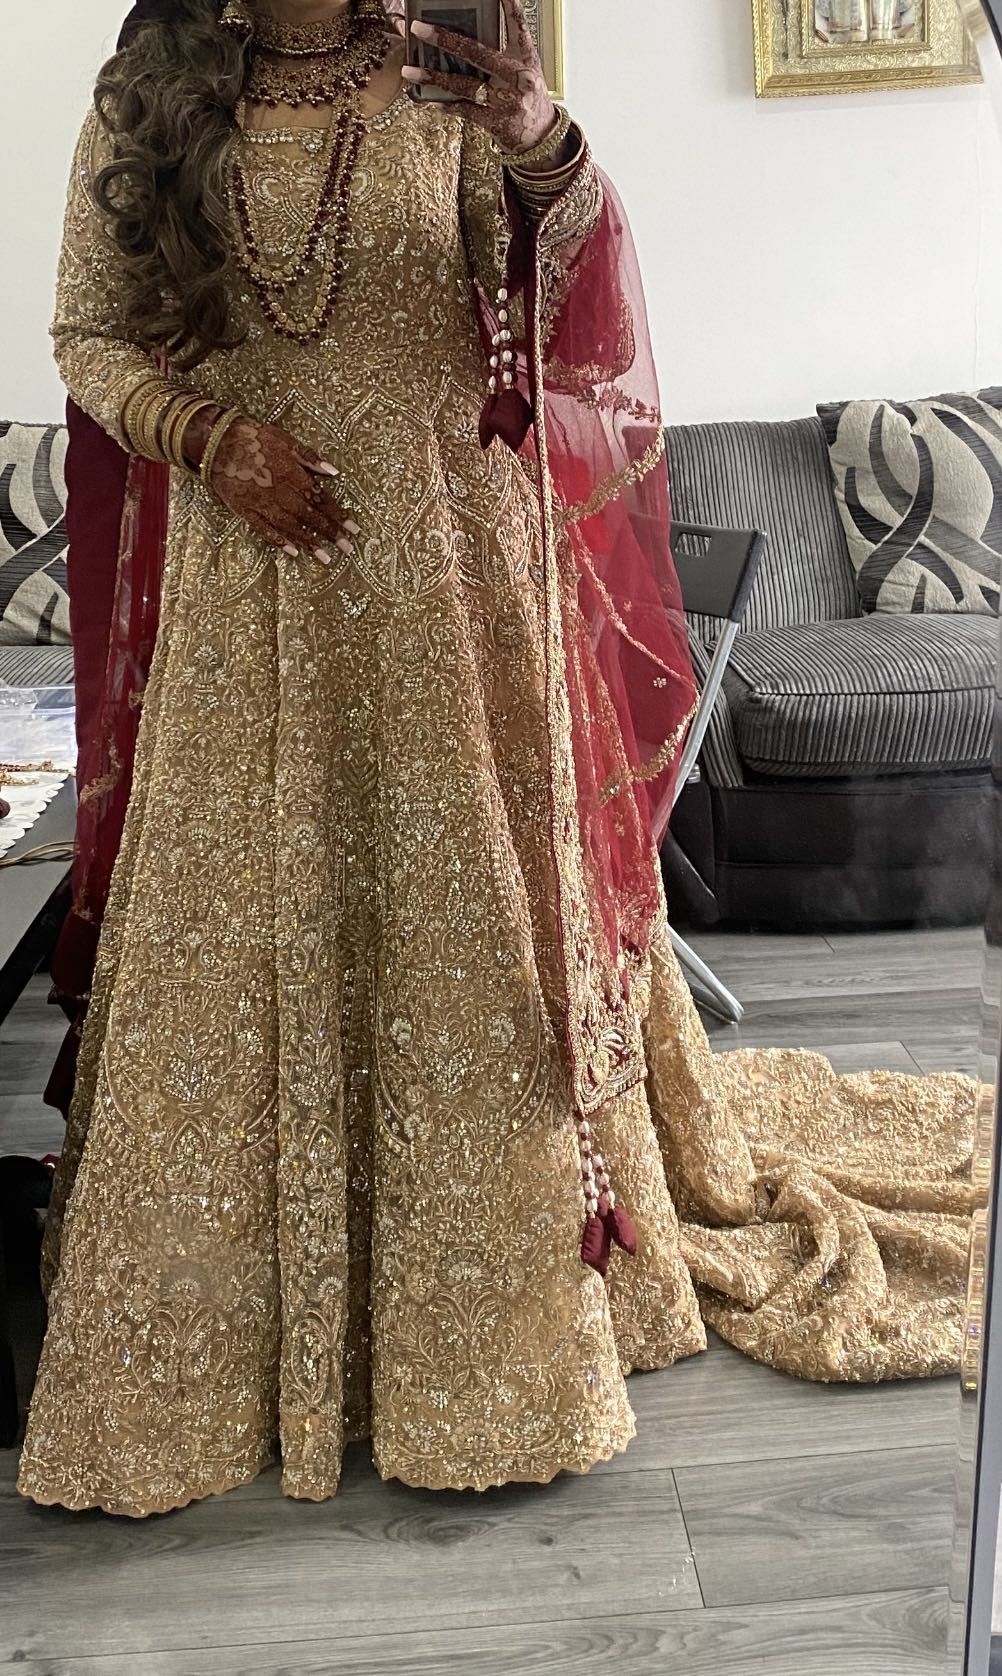 Gold Wedding Dress with Long Train, Red Dupatta and Bag